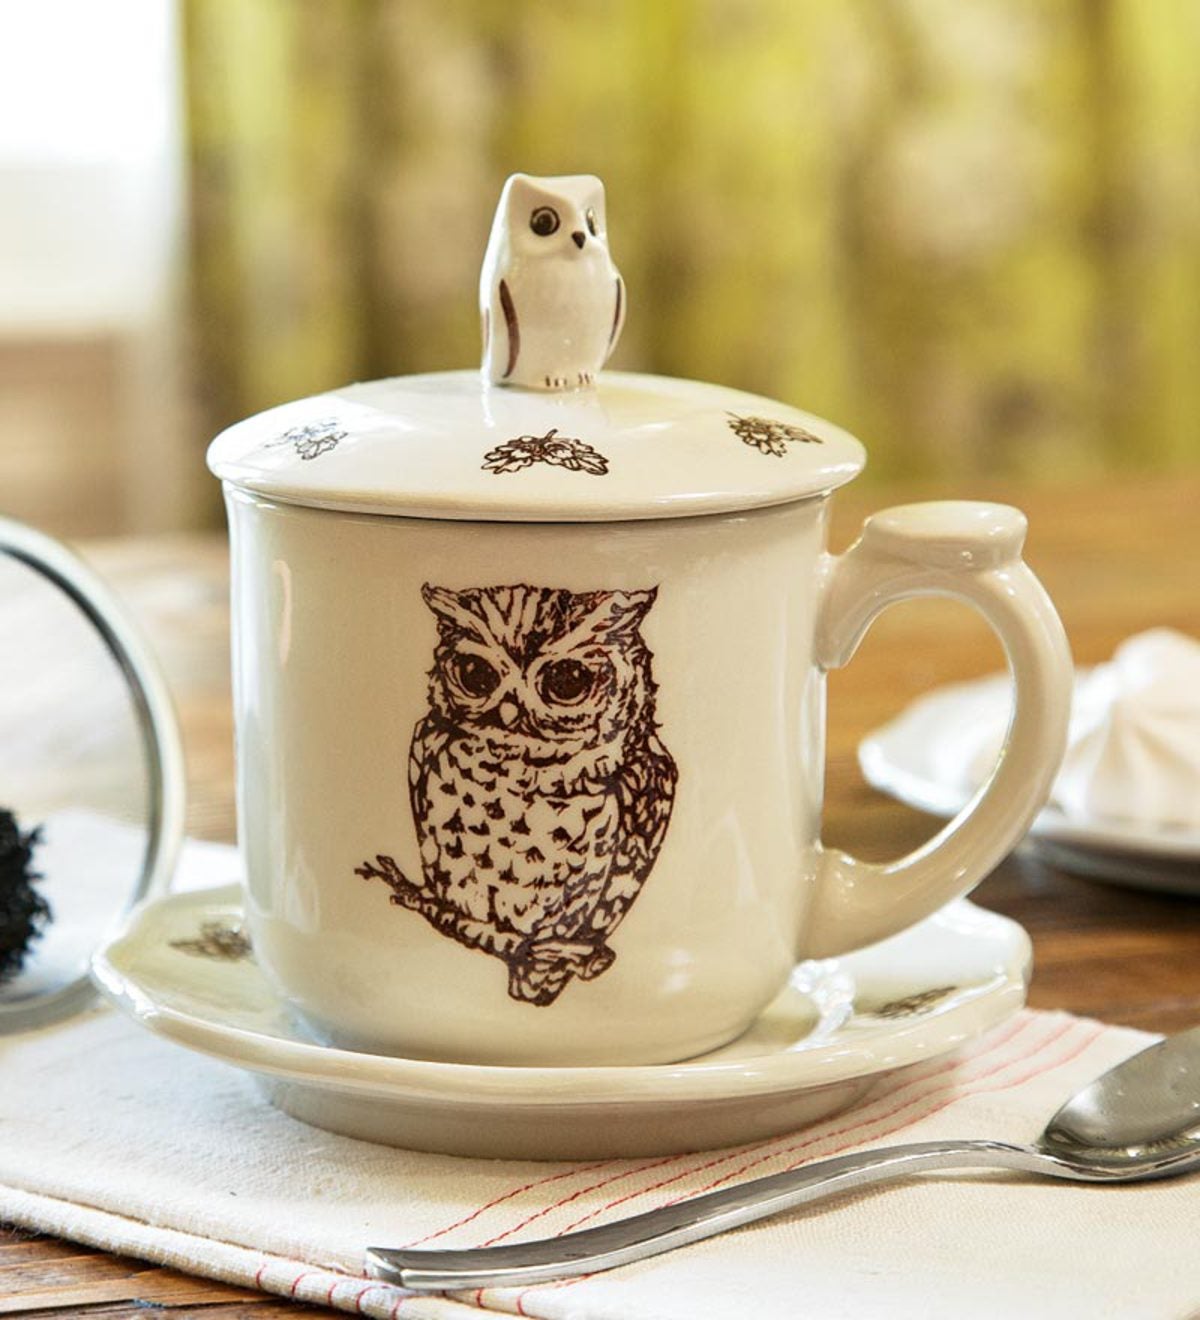 Horned Owl Bone China Covered Teacup And Saucer